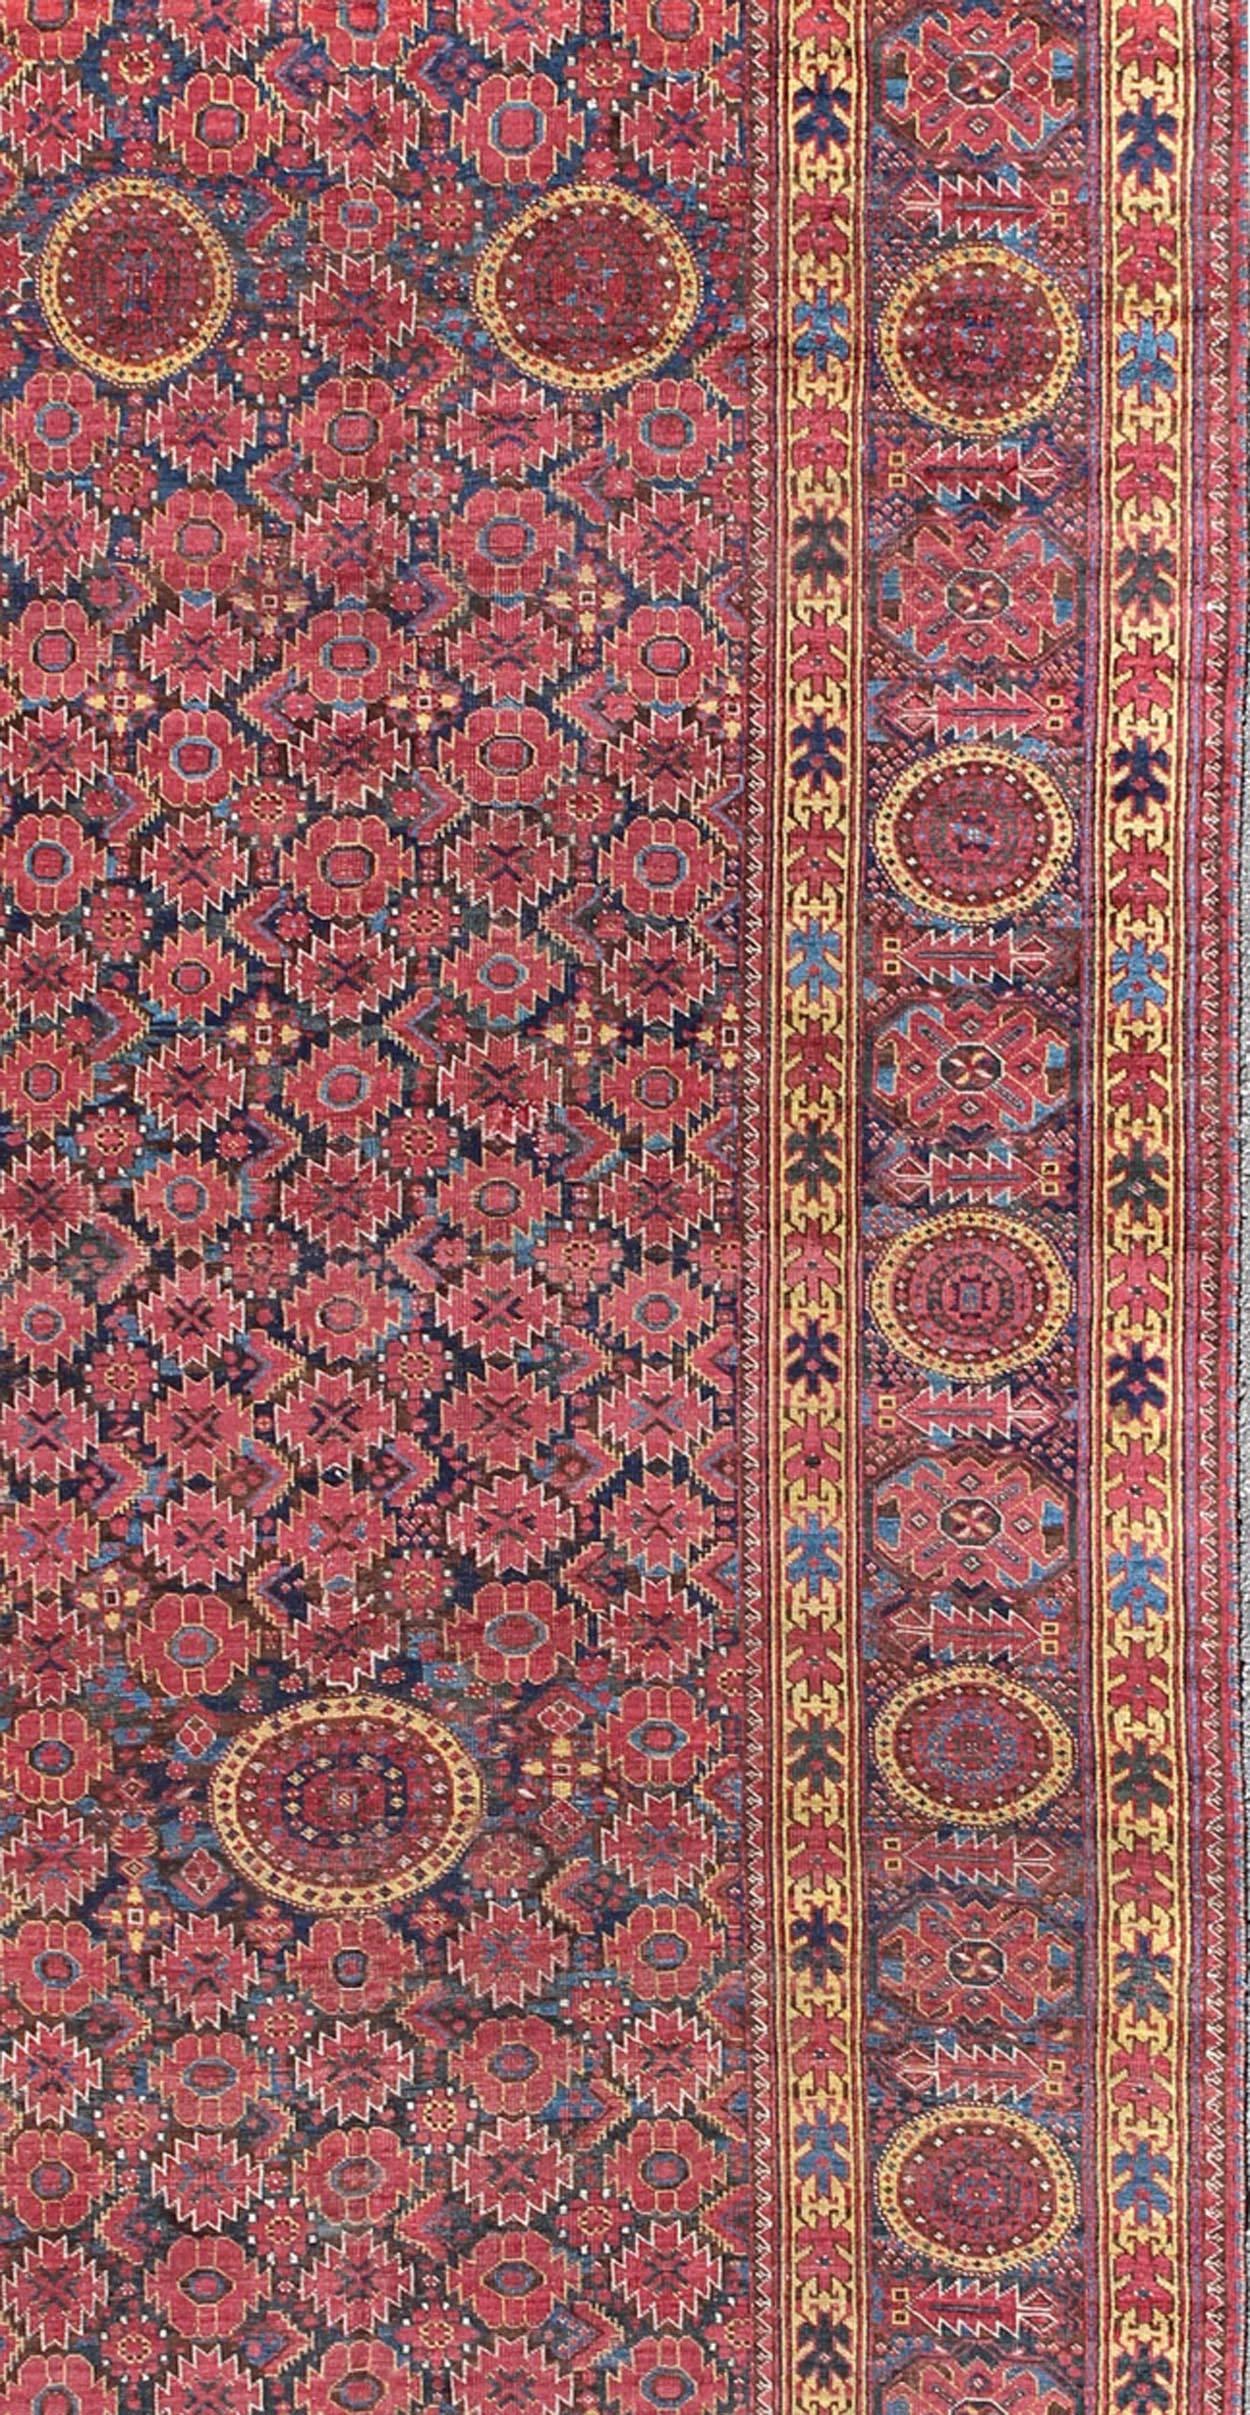 Afghan Rare 19th Century Antique Beshir Long Gallery Rug in Unique Colors For Sale